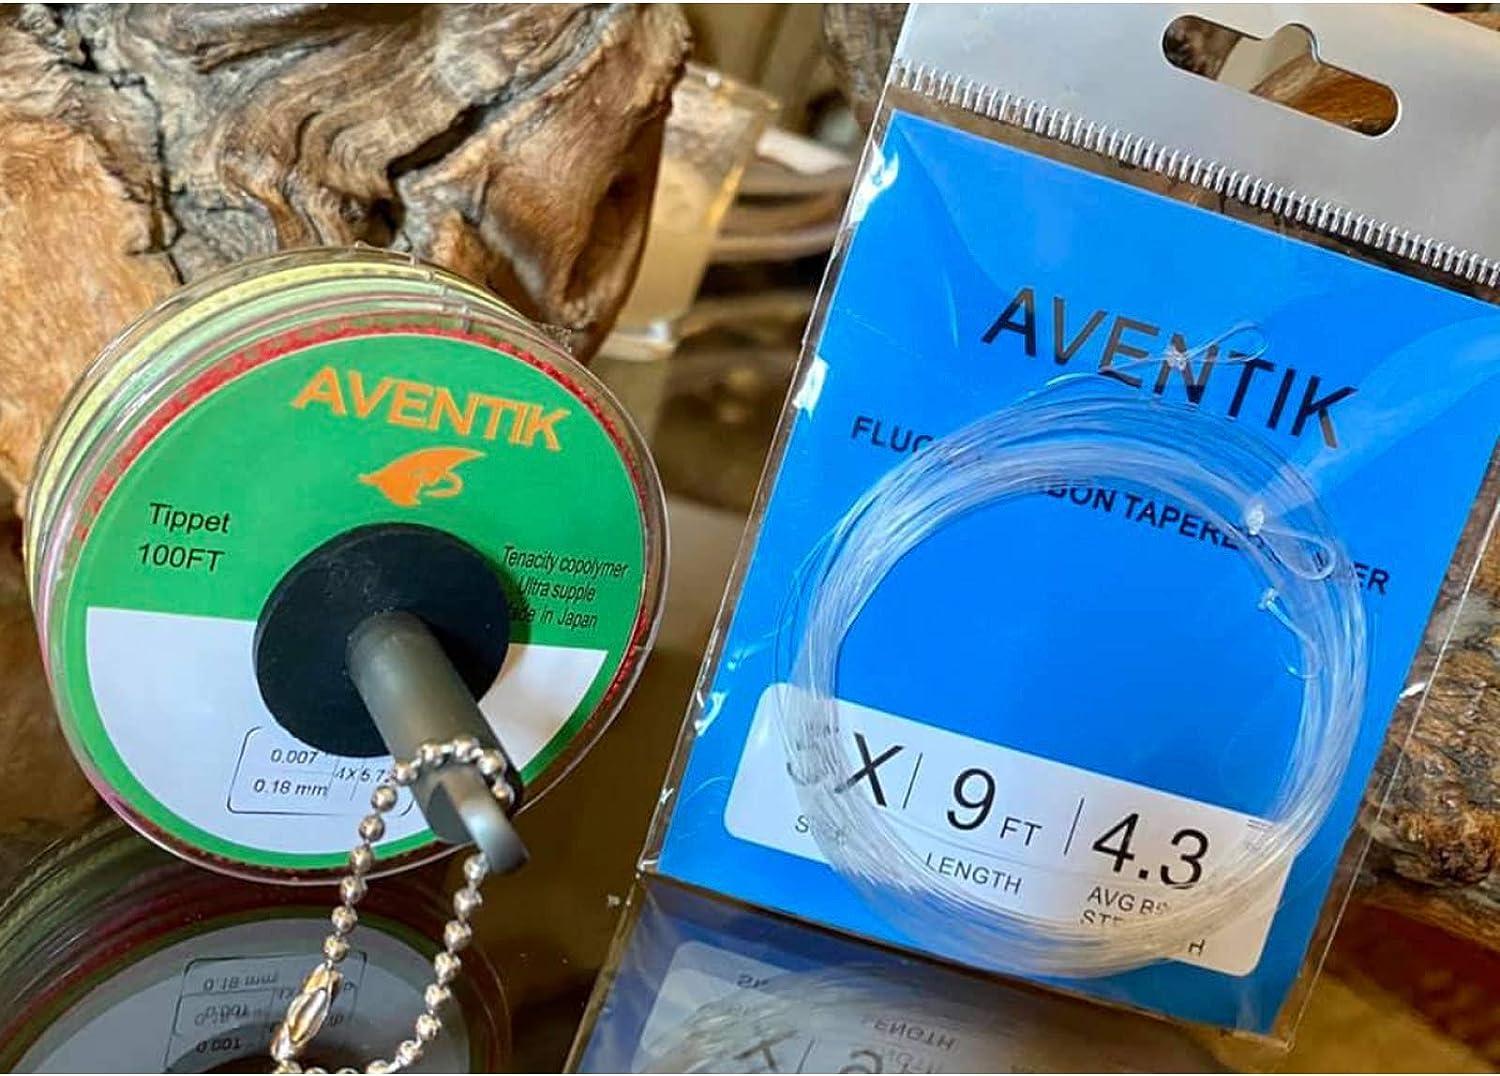 3 PC Aventik Premium Fly Fluorocarbon Tapered Leader Fly Line Freshwater  Saltwater 9ft Fly Tippet Tapered Leader Fly Fishing Leaders Pro Looped X0 to  X7 5X-4.3LB